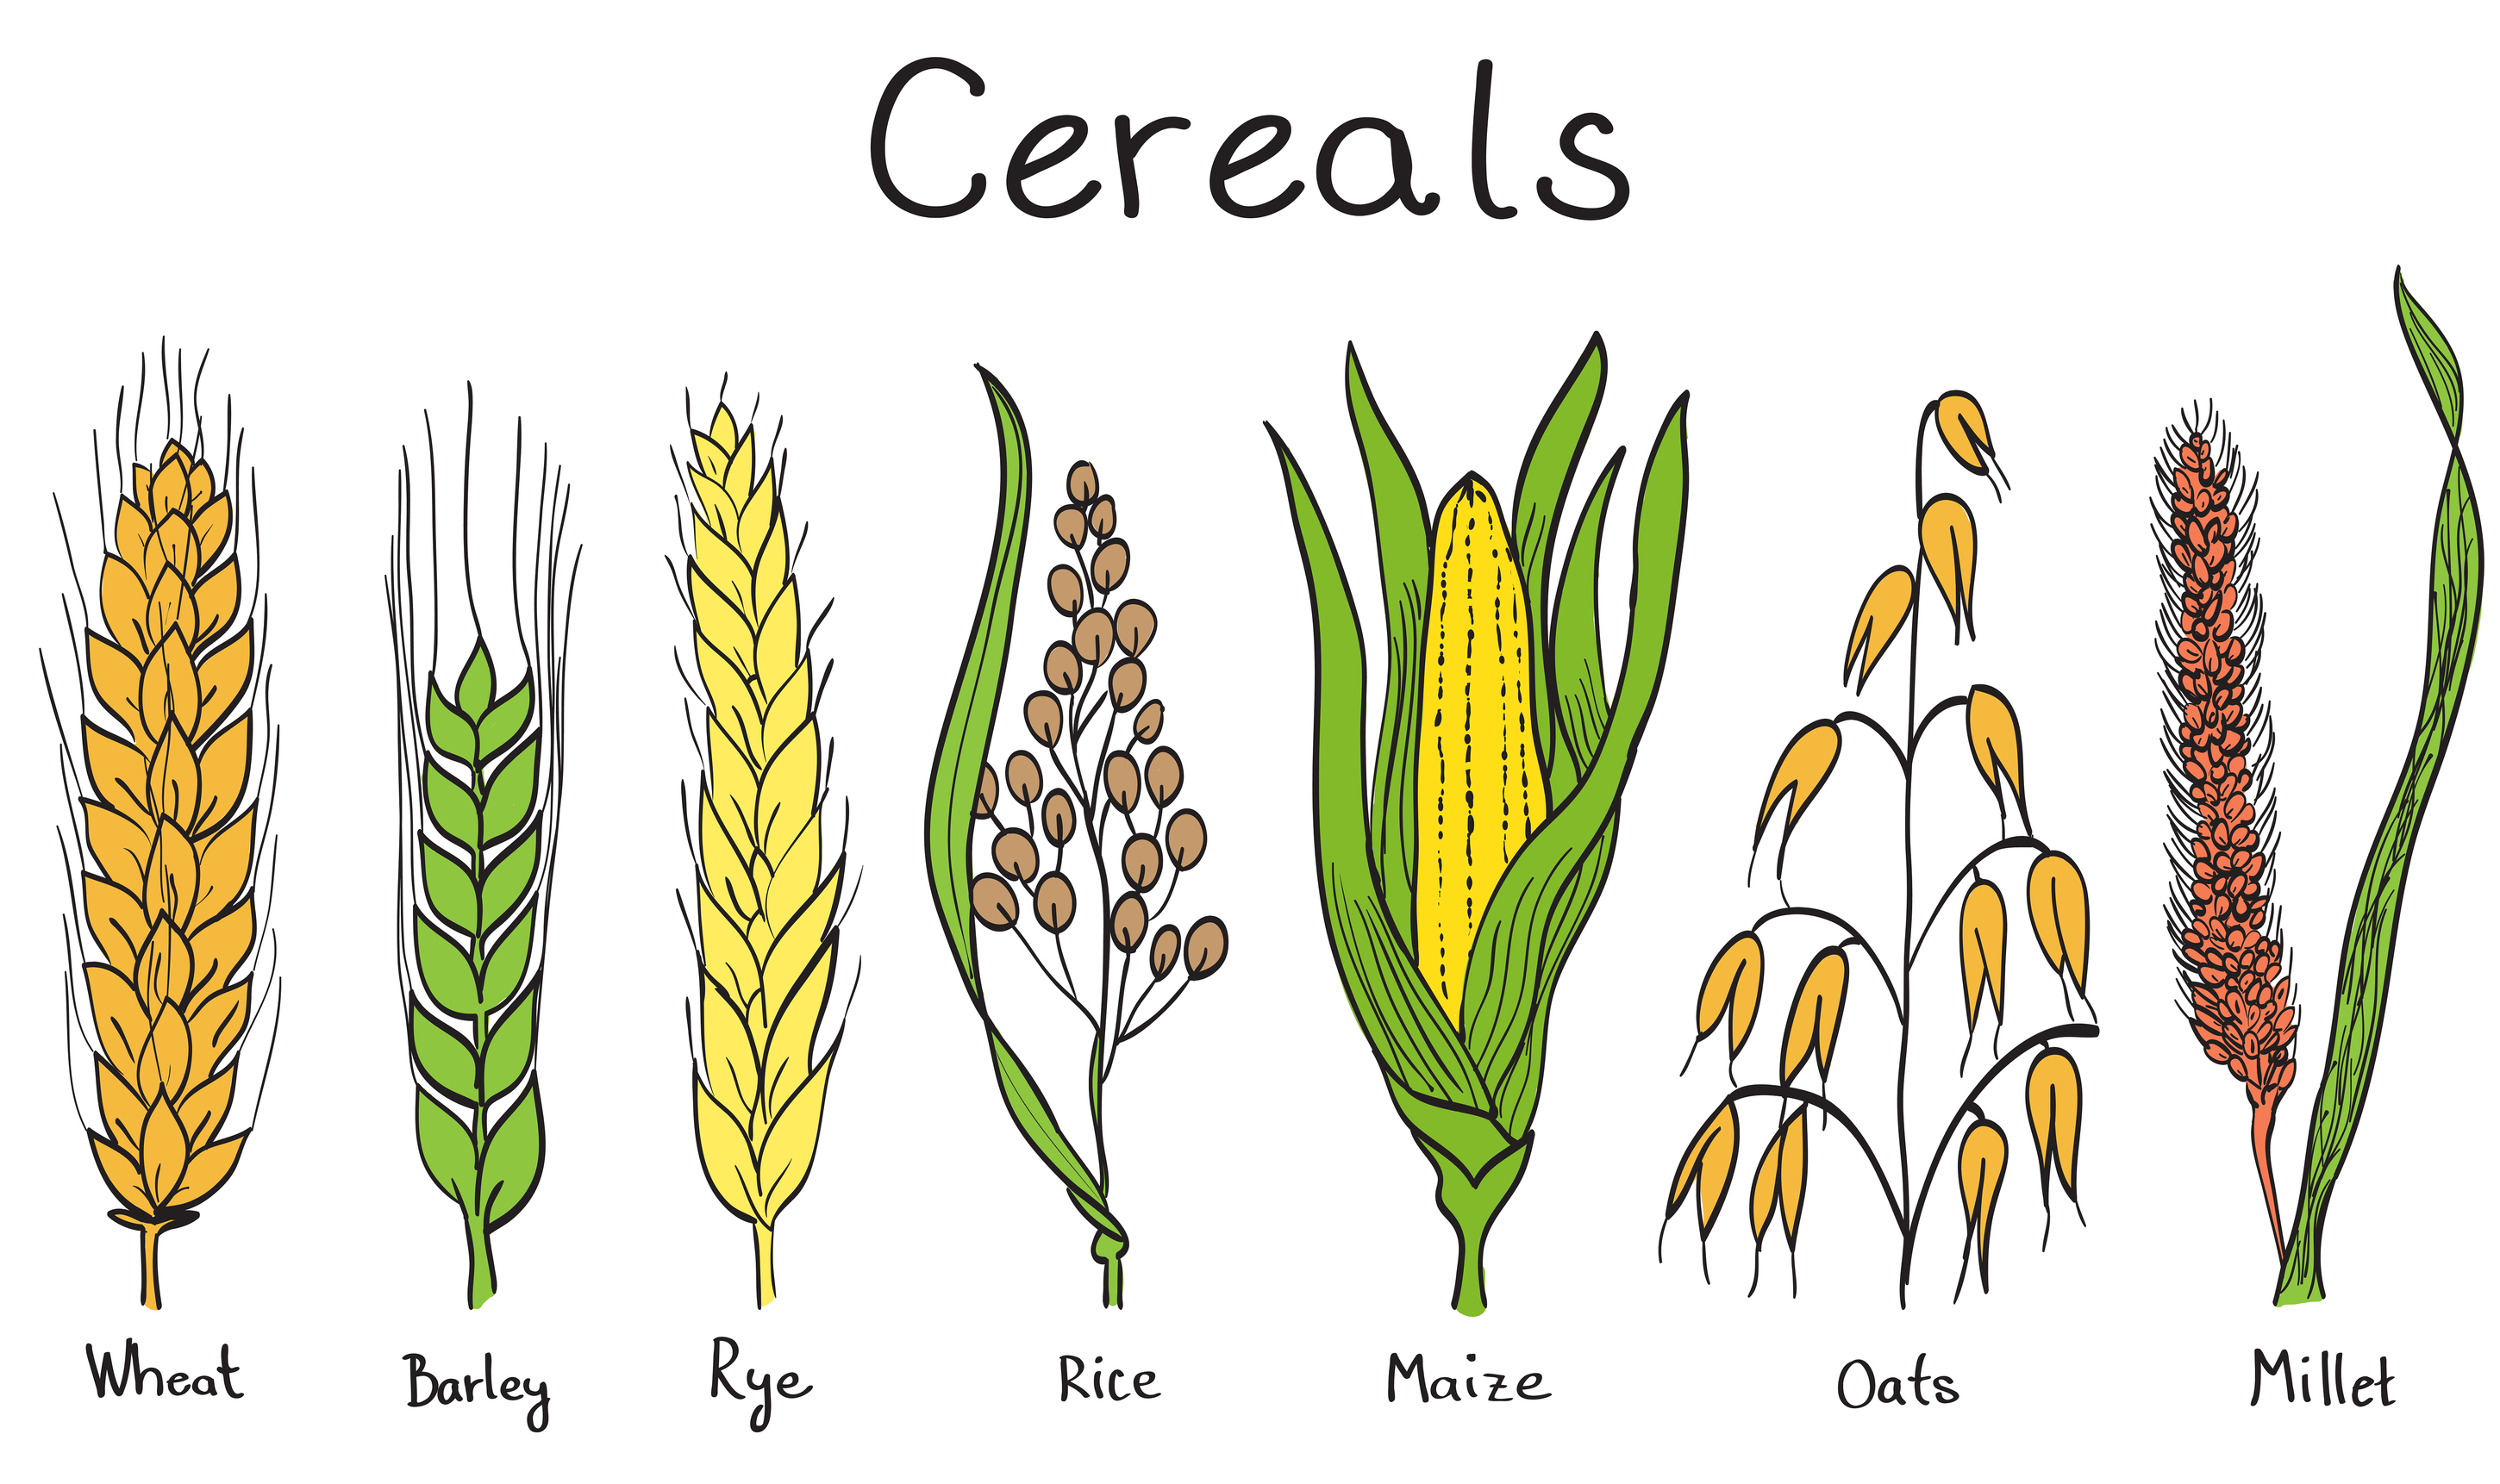 Here Are Some Of The Most Important Cereals Grown And Eaten Around The